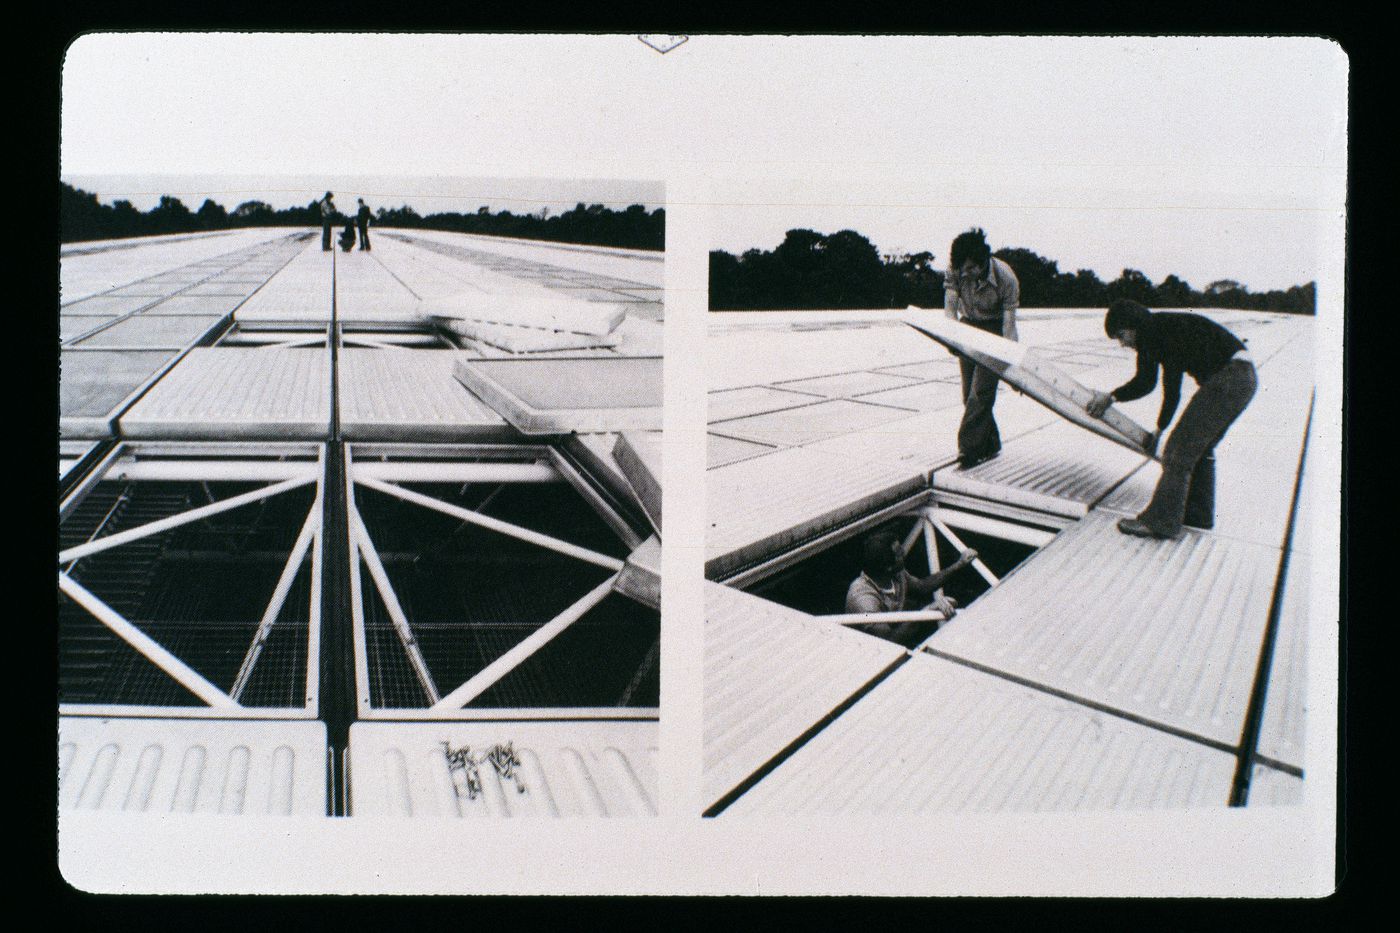 Slide of a photograph of Sainsbury Centre for Visual Arts, Norwich, by Norman Foster